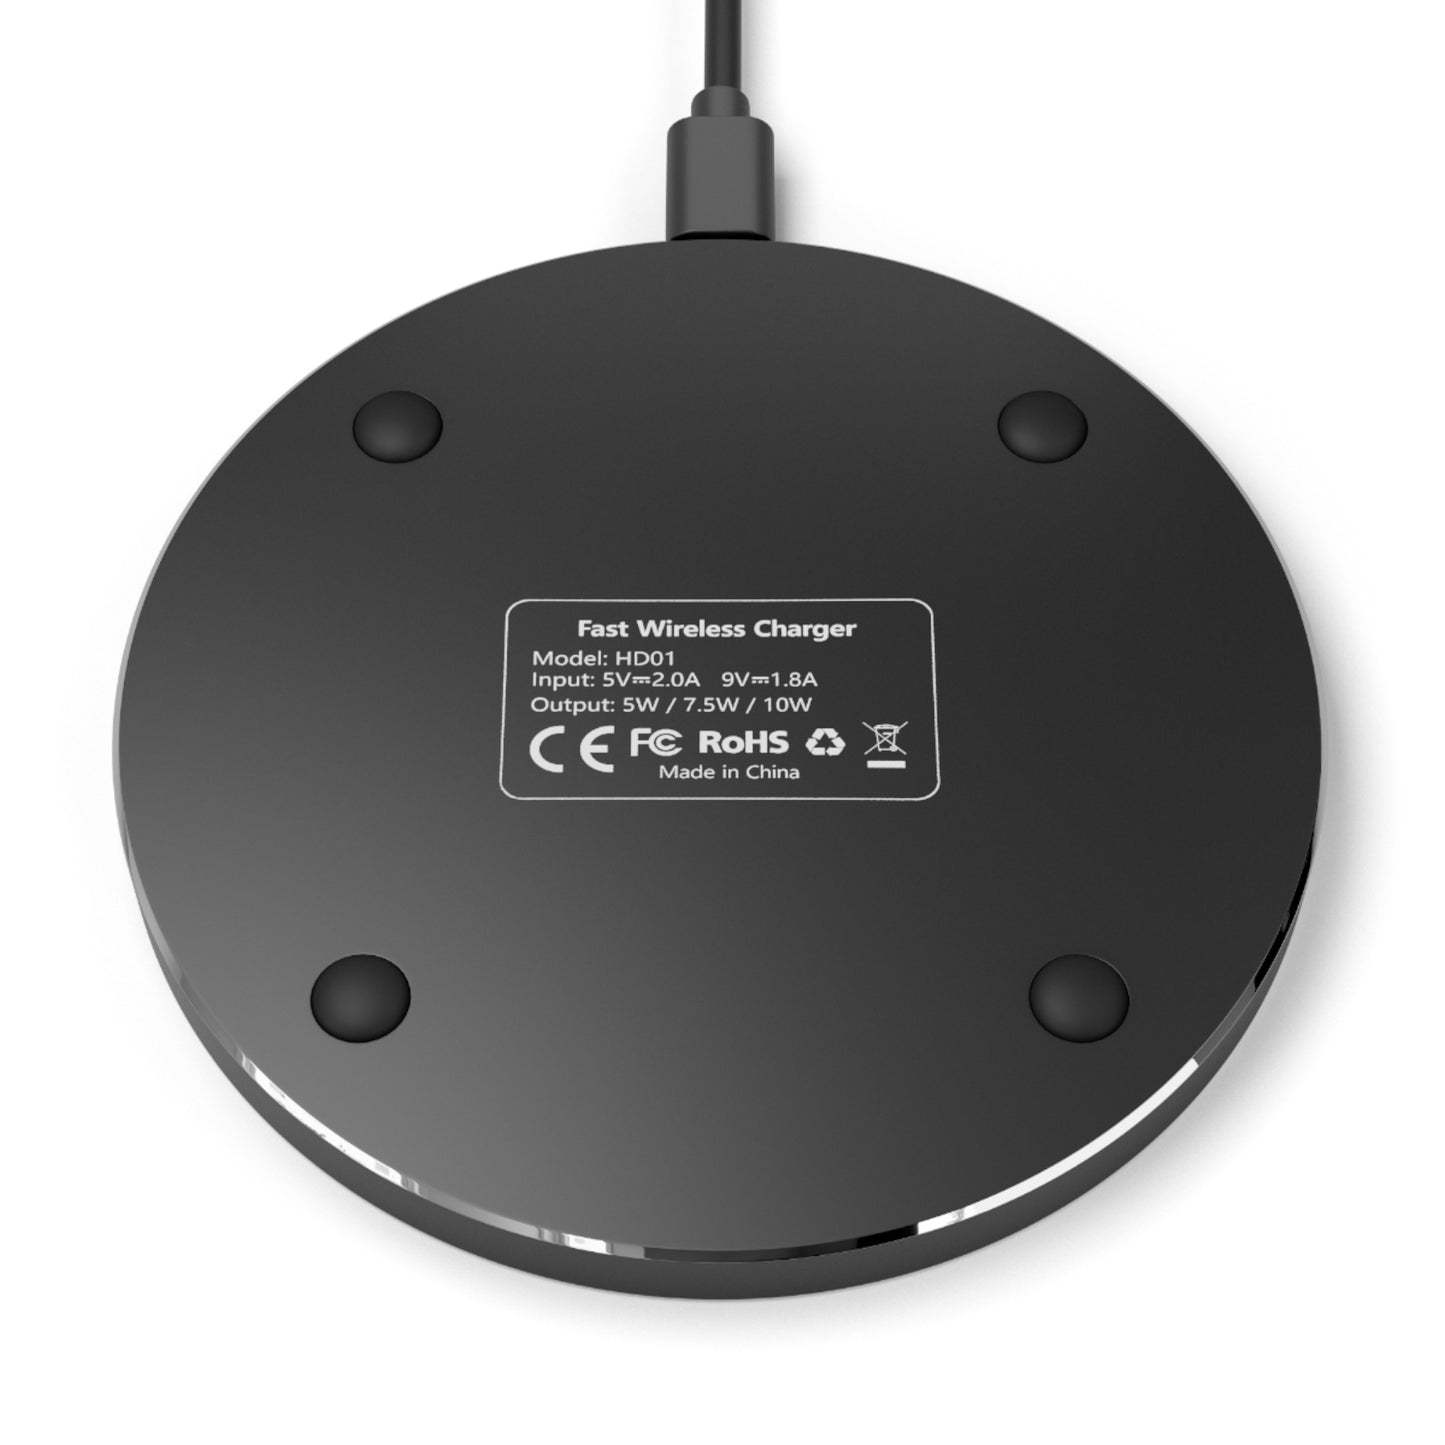 Daisy Undersides Wireless Charger